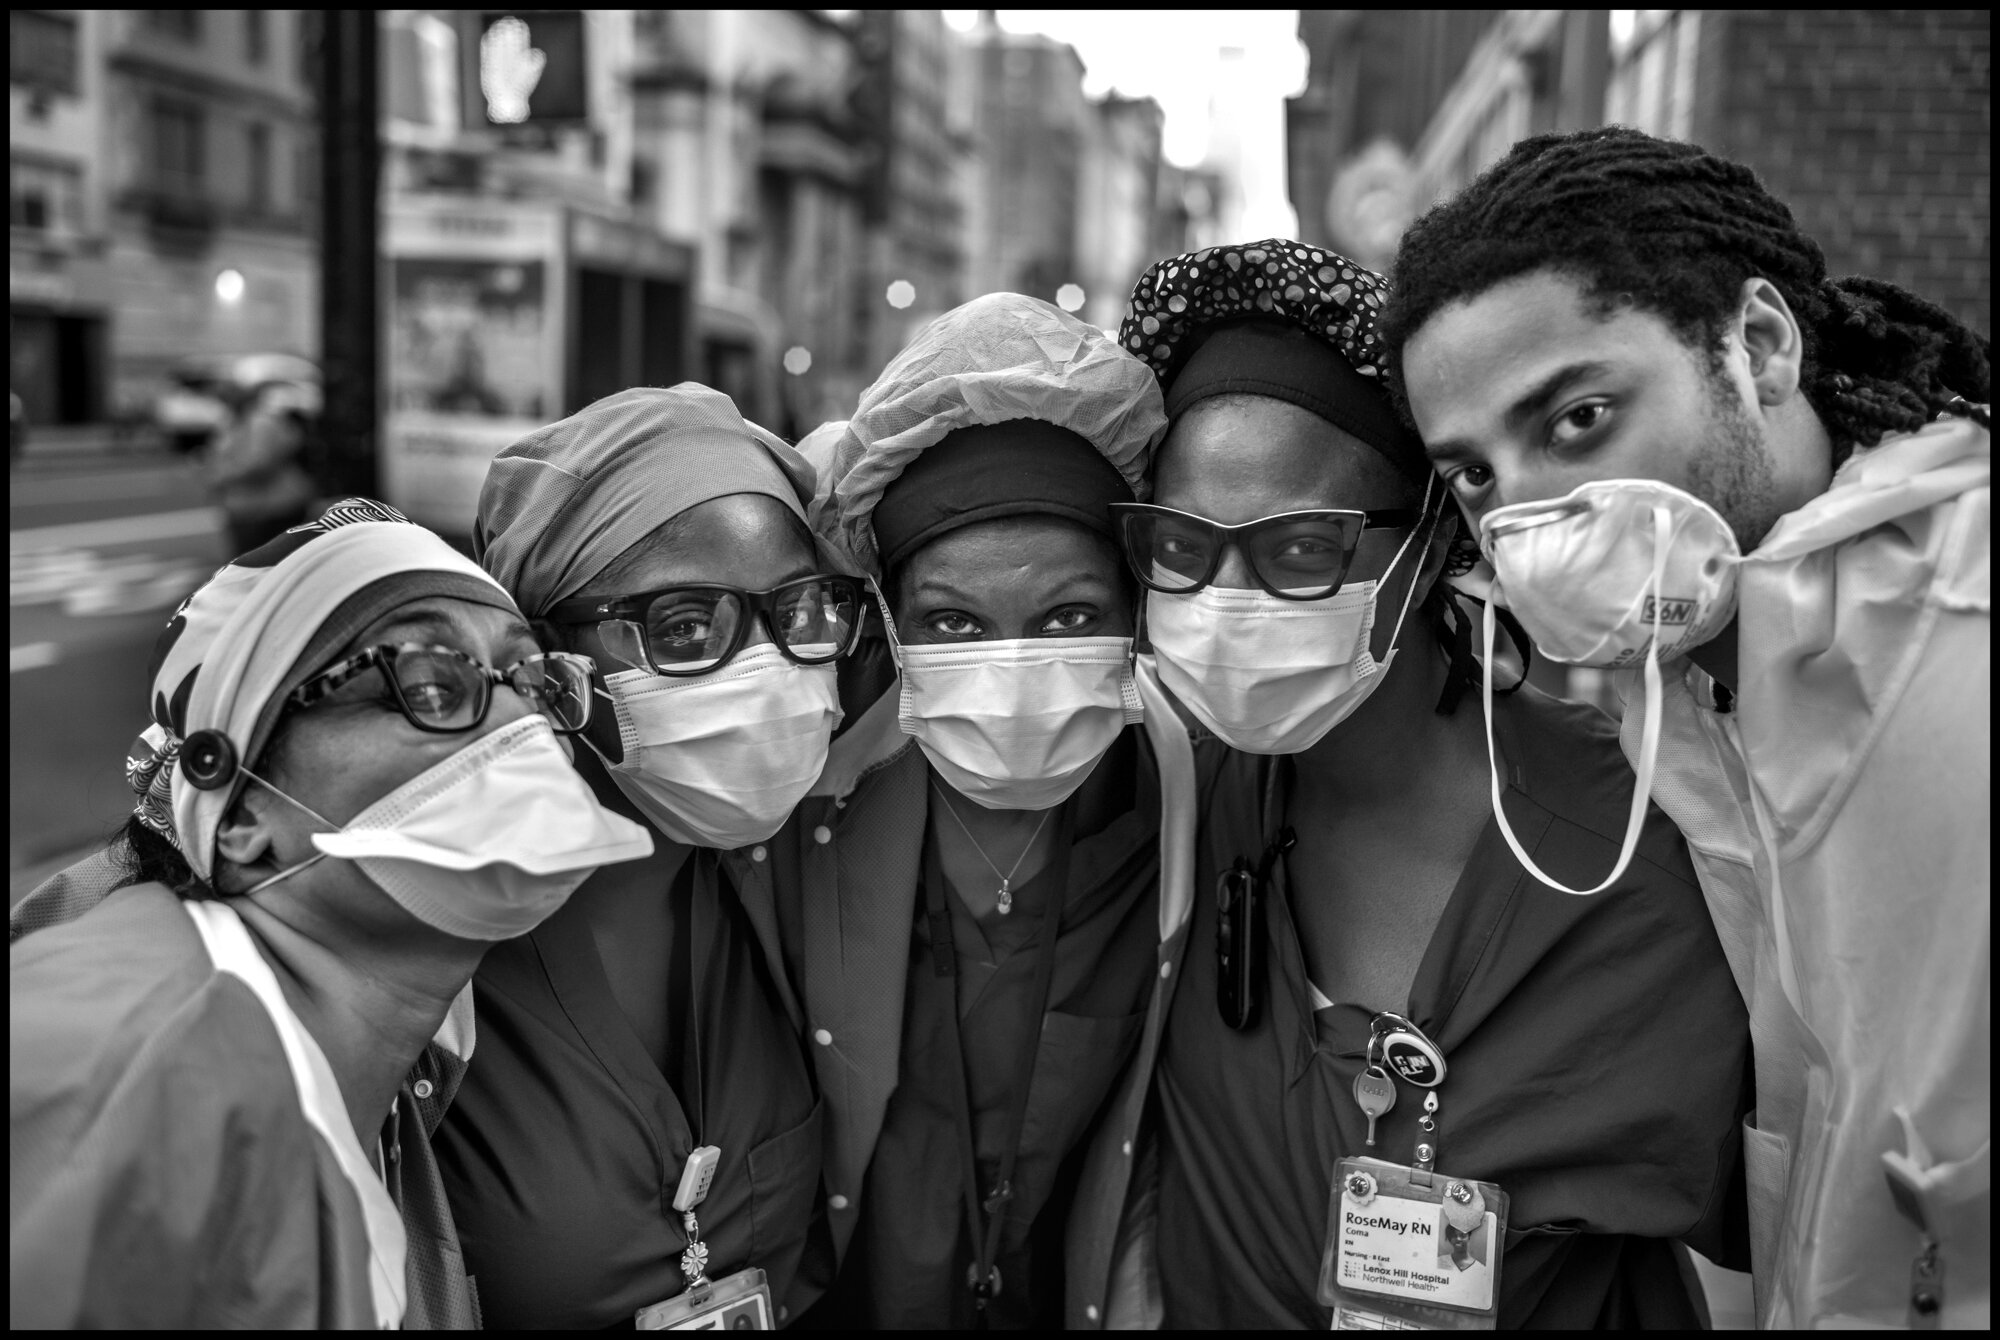  A group of ICU nurses from Lenox Hill Hospital on New York’s Upper East Siide. Sean, 30, on the right, told me, “diversity and unity. There is strenght the in diversity and unity . We are a team and have to stay together.”   May 3, 2020. © Peter Tur